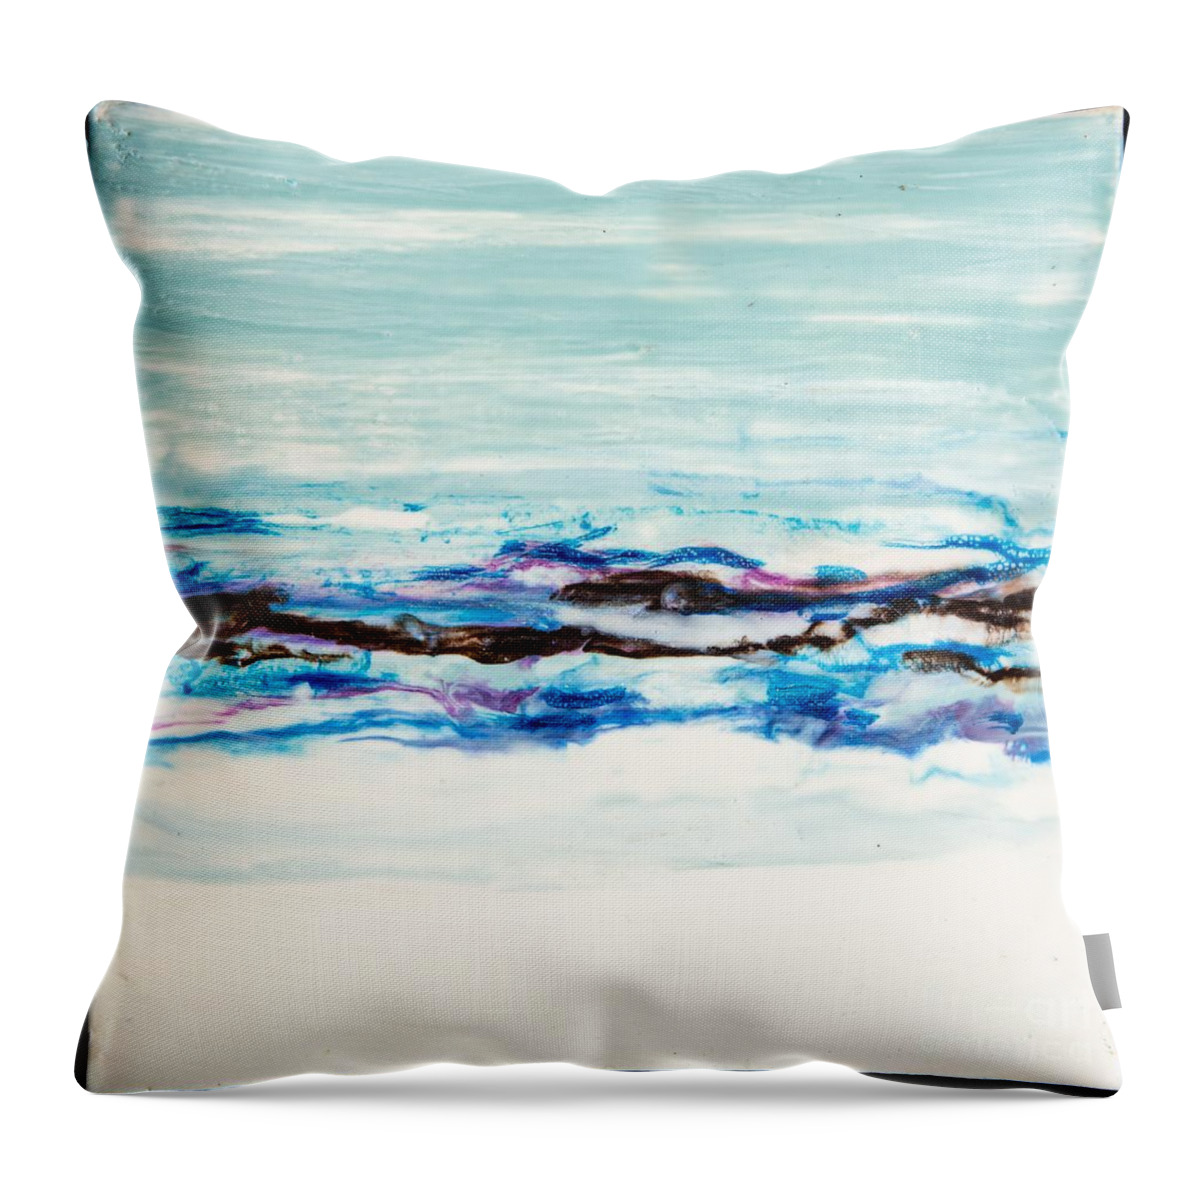 Abstract Throw Pillow featuring the digital art Seaside Series I - Colorful Abstract Contemporary Acrylic Painting by Sambel Pedes